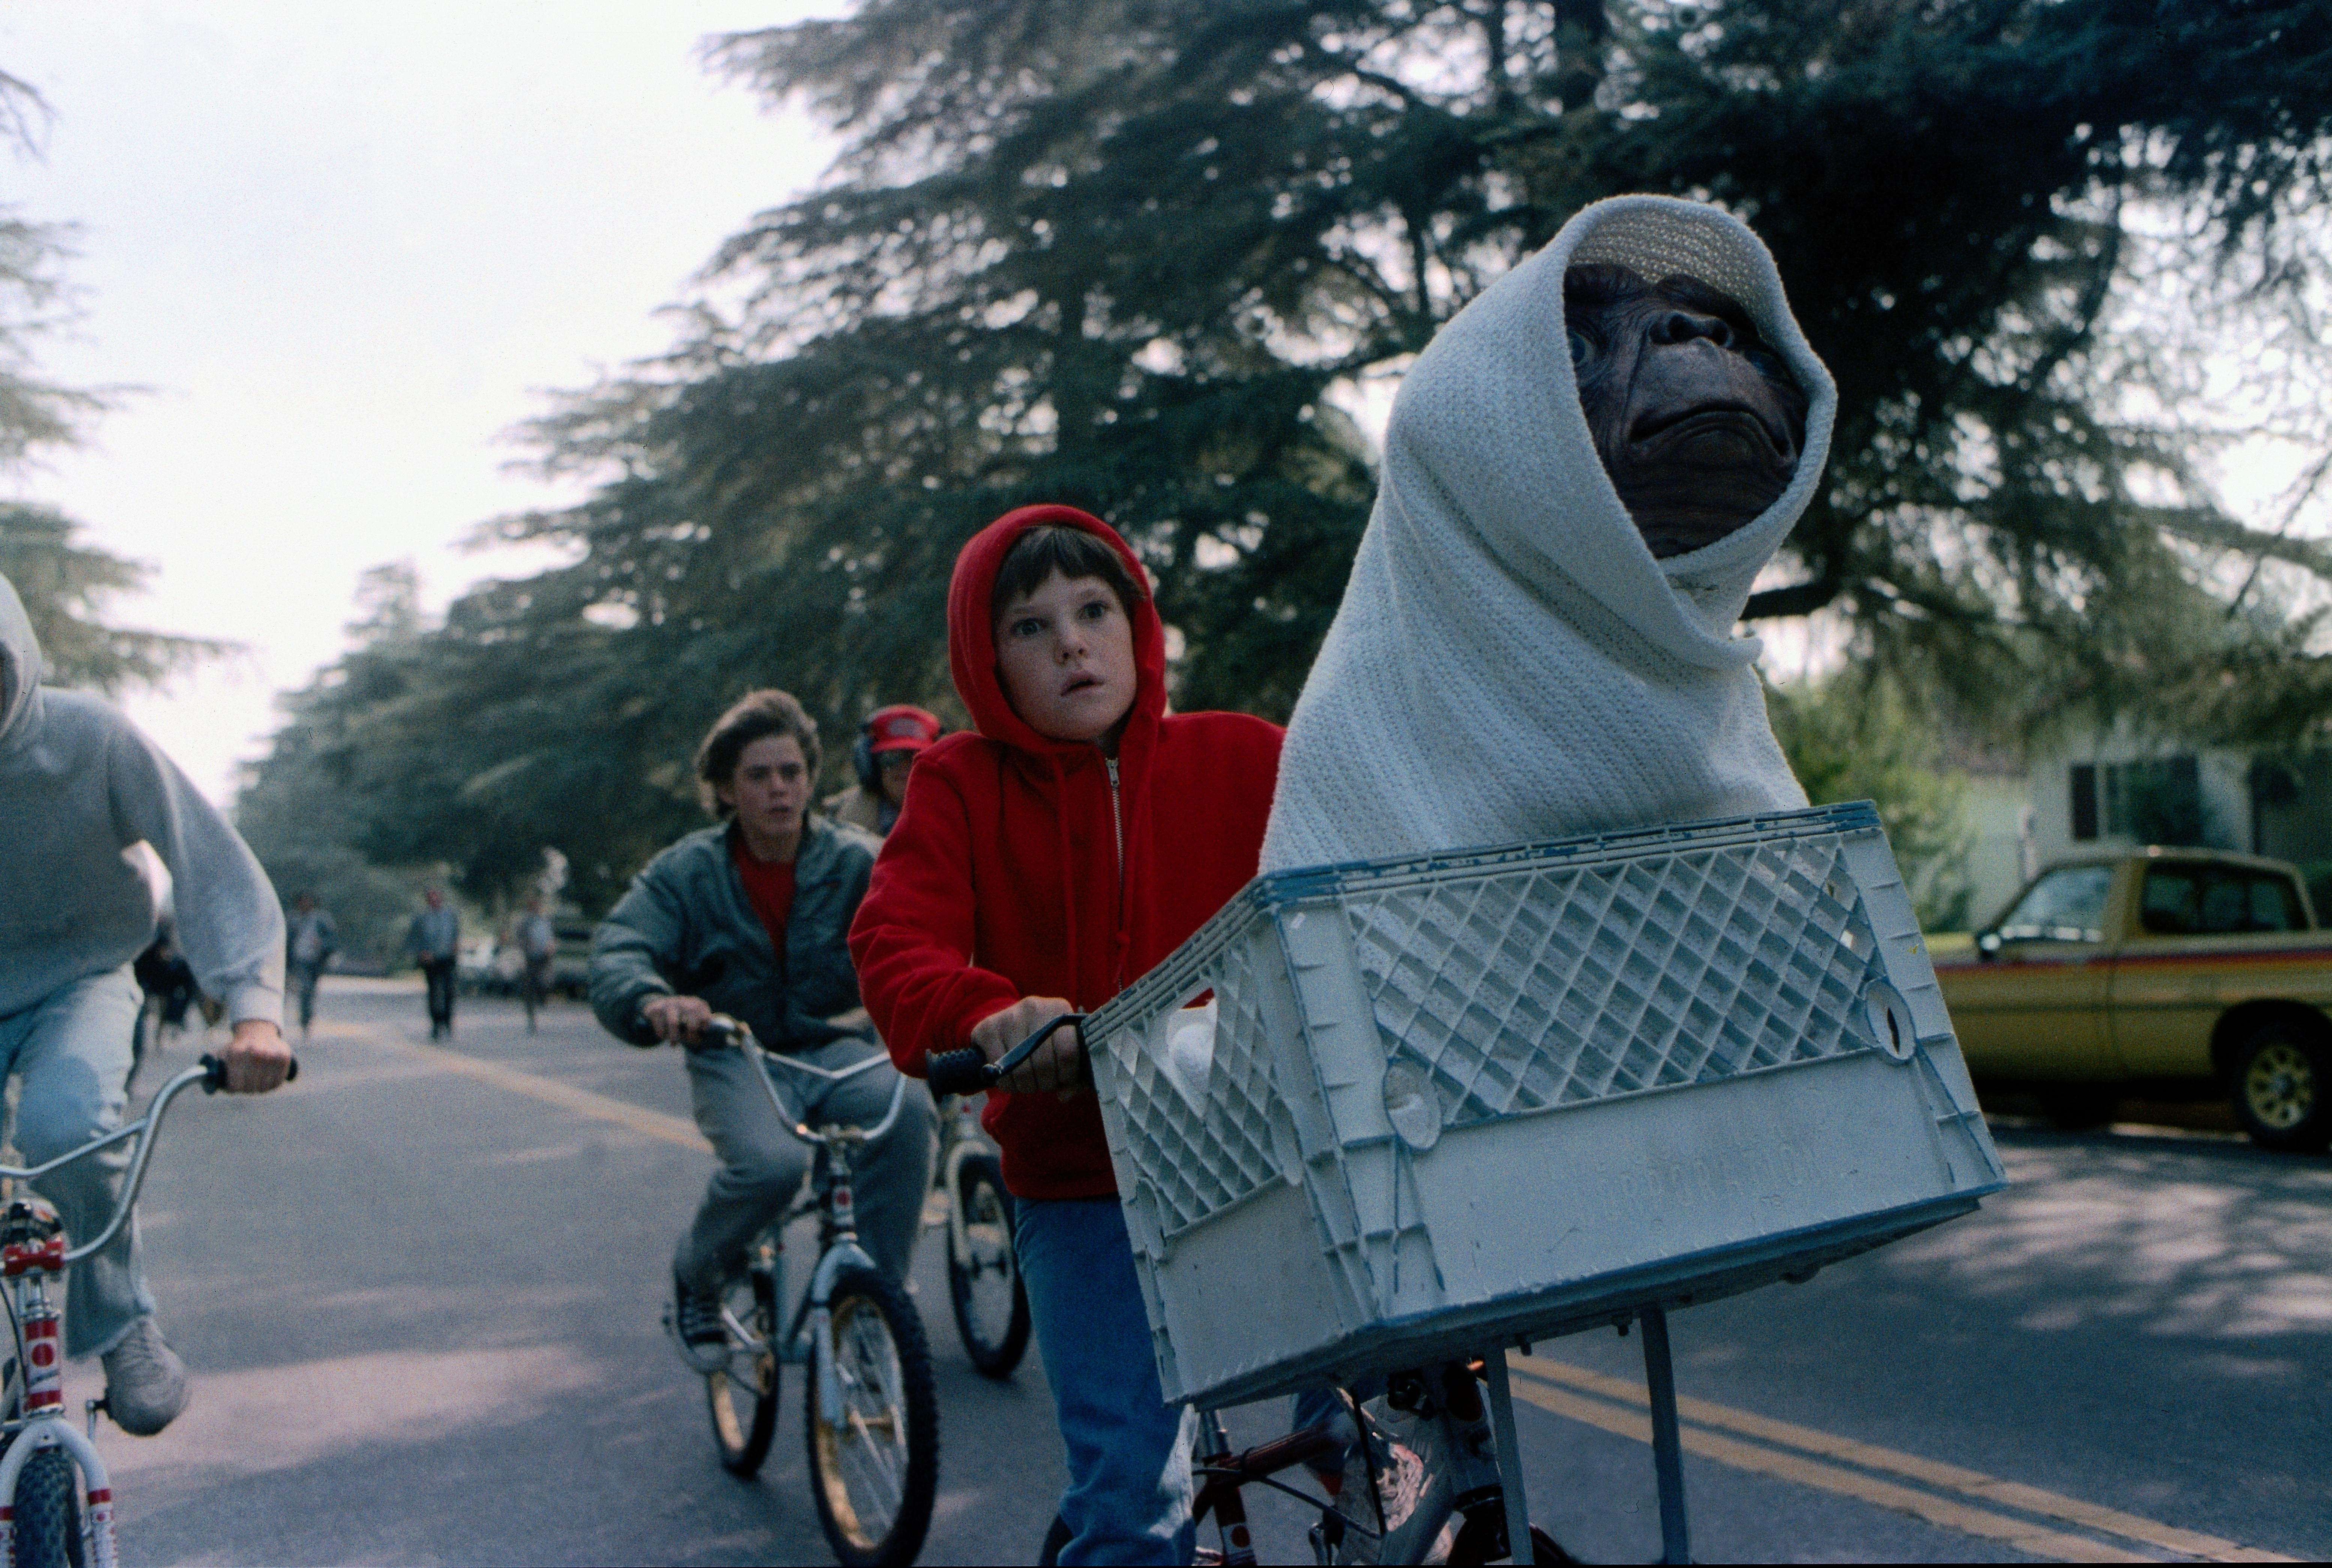 E.T. The Extra Terrestrial (1982)